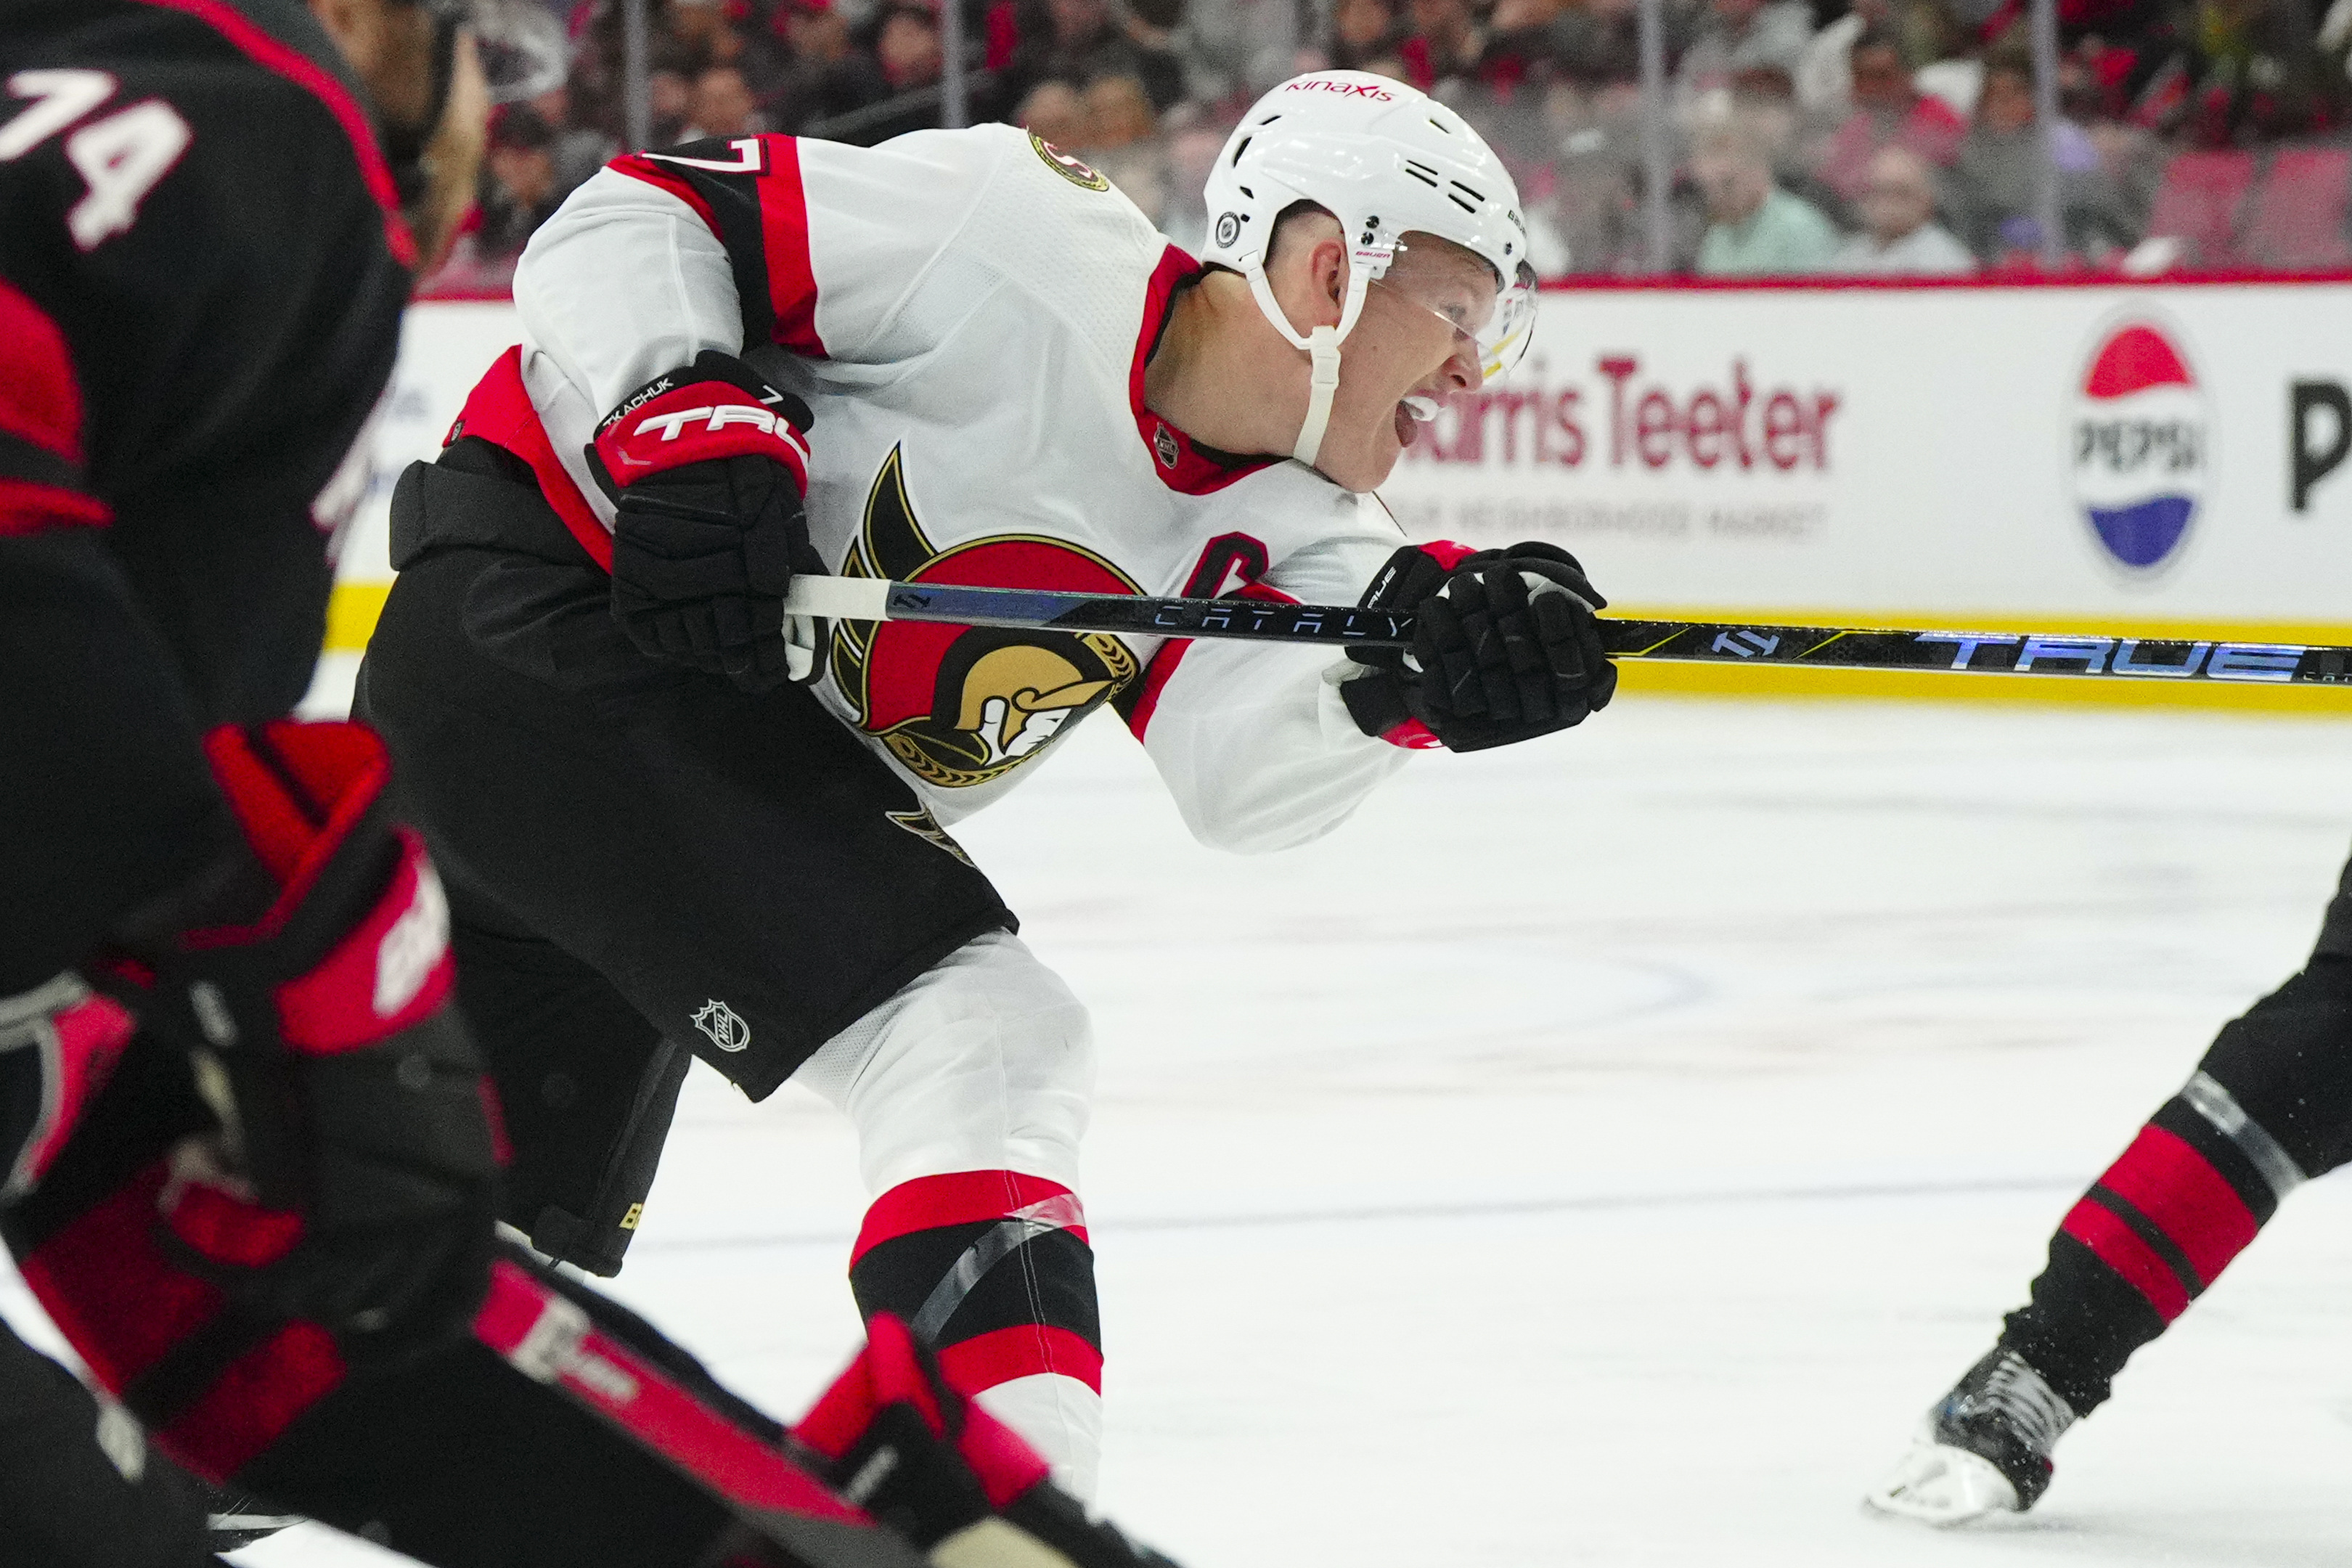 Third-period surge lifts Hurricanes past Senators - The Rink Live   Comprehensive coverage of youth, junior, high school and college hockey